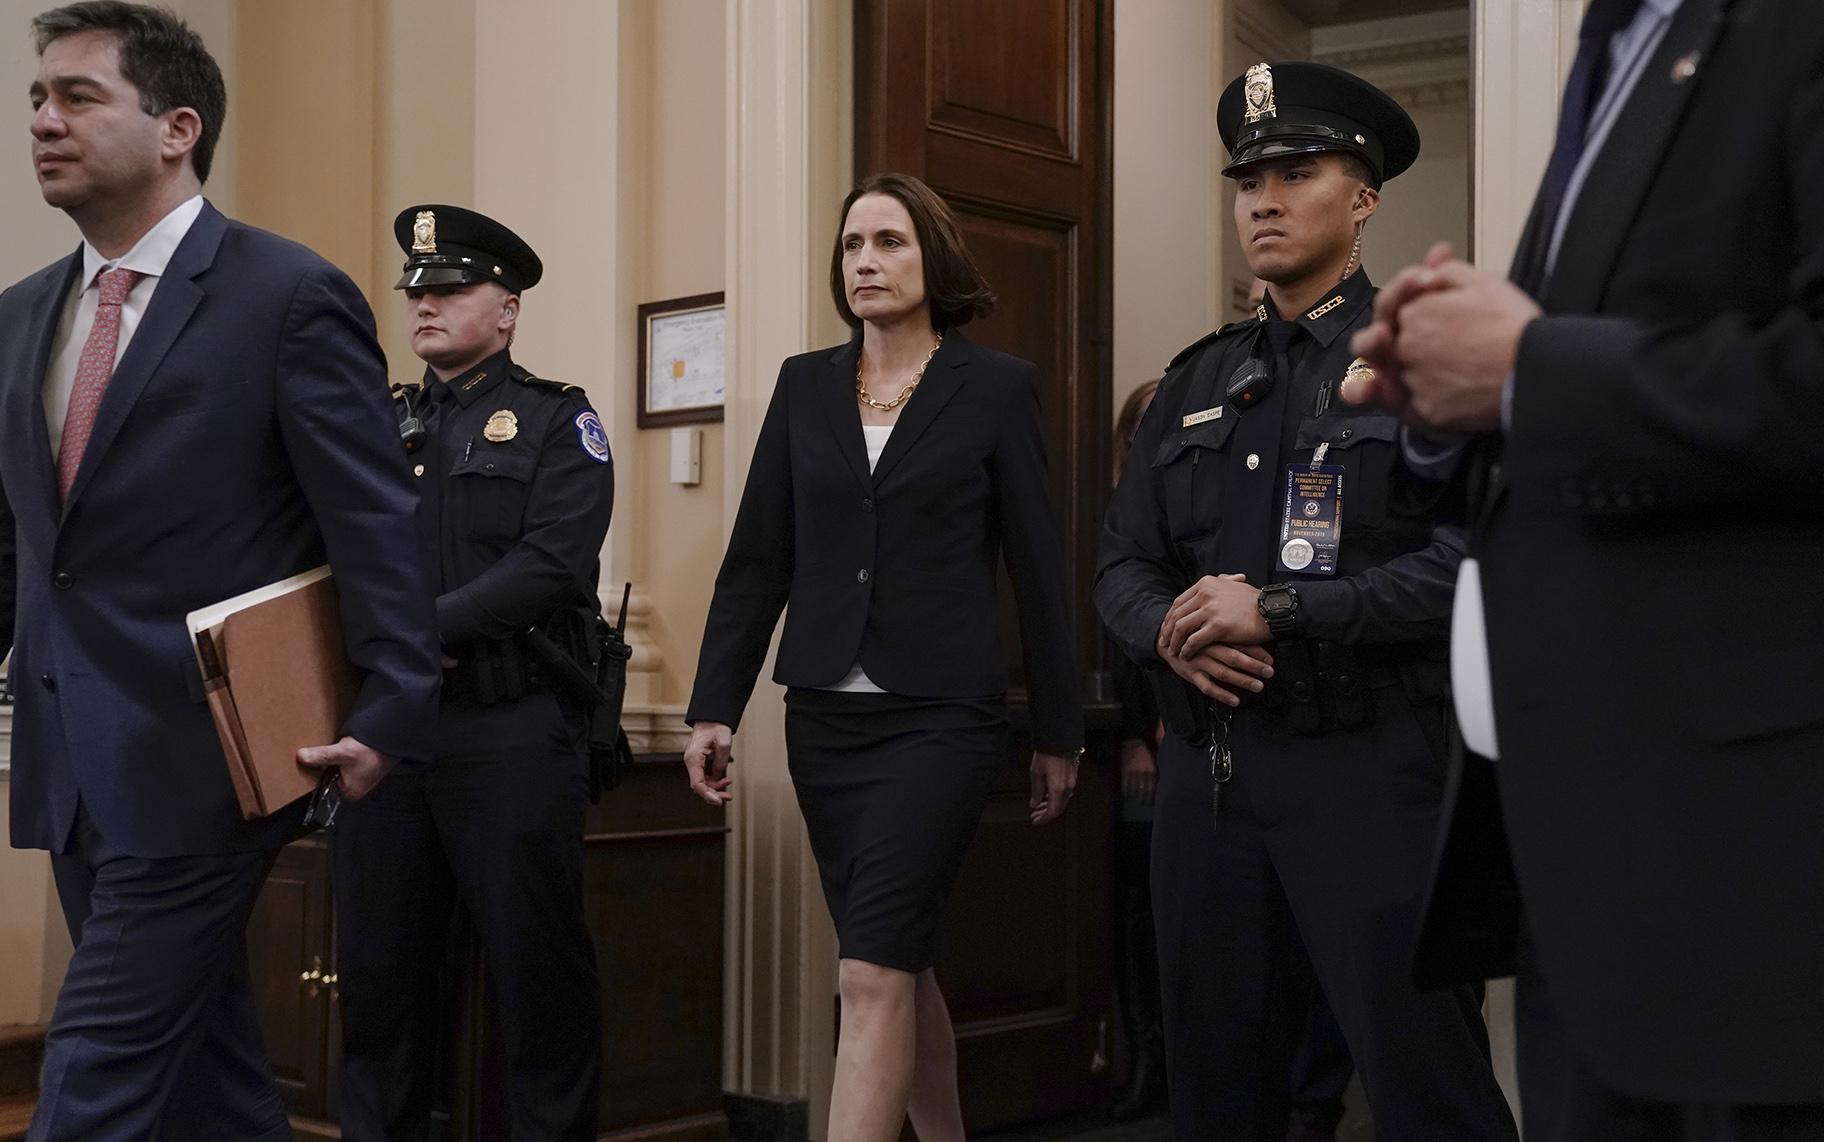  Former White House national security aide Fiona Hill returns from a break to testify before the House Intelligence Committee on Capitol Hill in Washington, Thursday, Nov. 21, 2019. (AP Photo / J. Scott Applewhite)